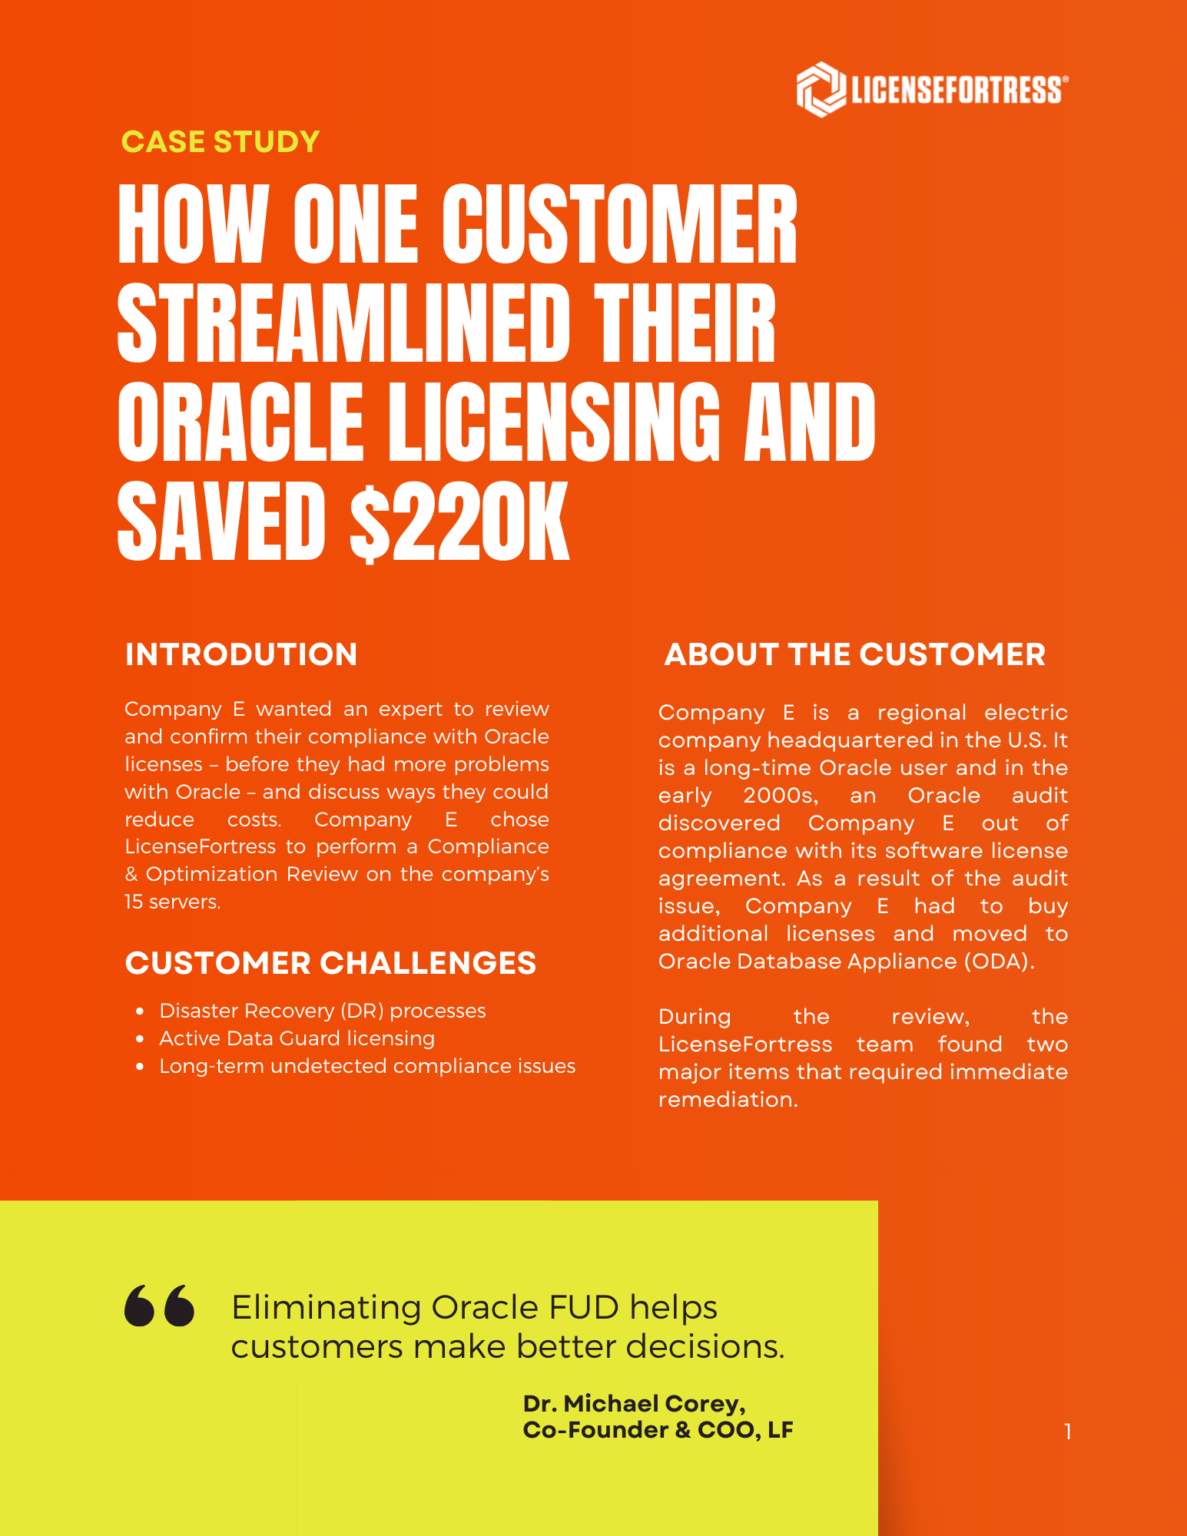 How one customer streamlined their Oracle licensing and saved $220k